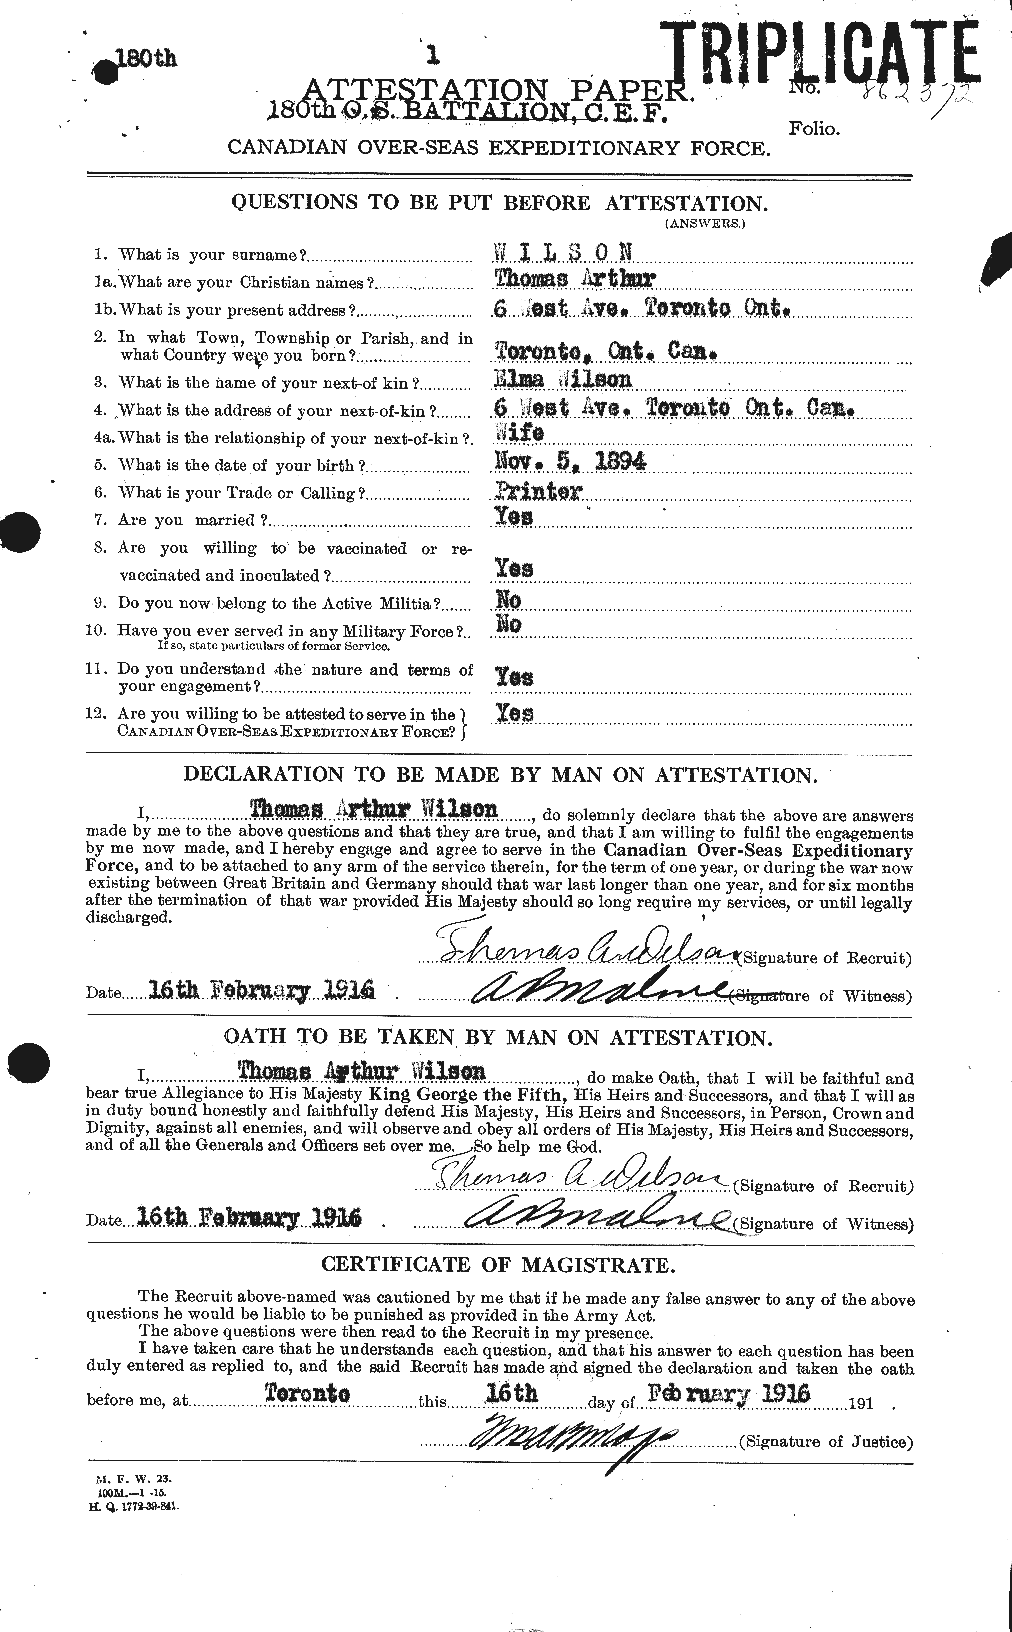 Personnel Records of the First World War - CEF 681235a